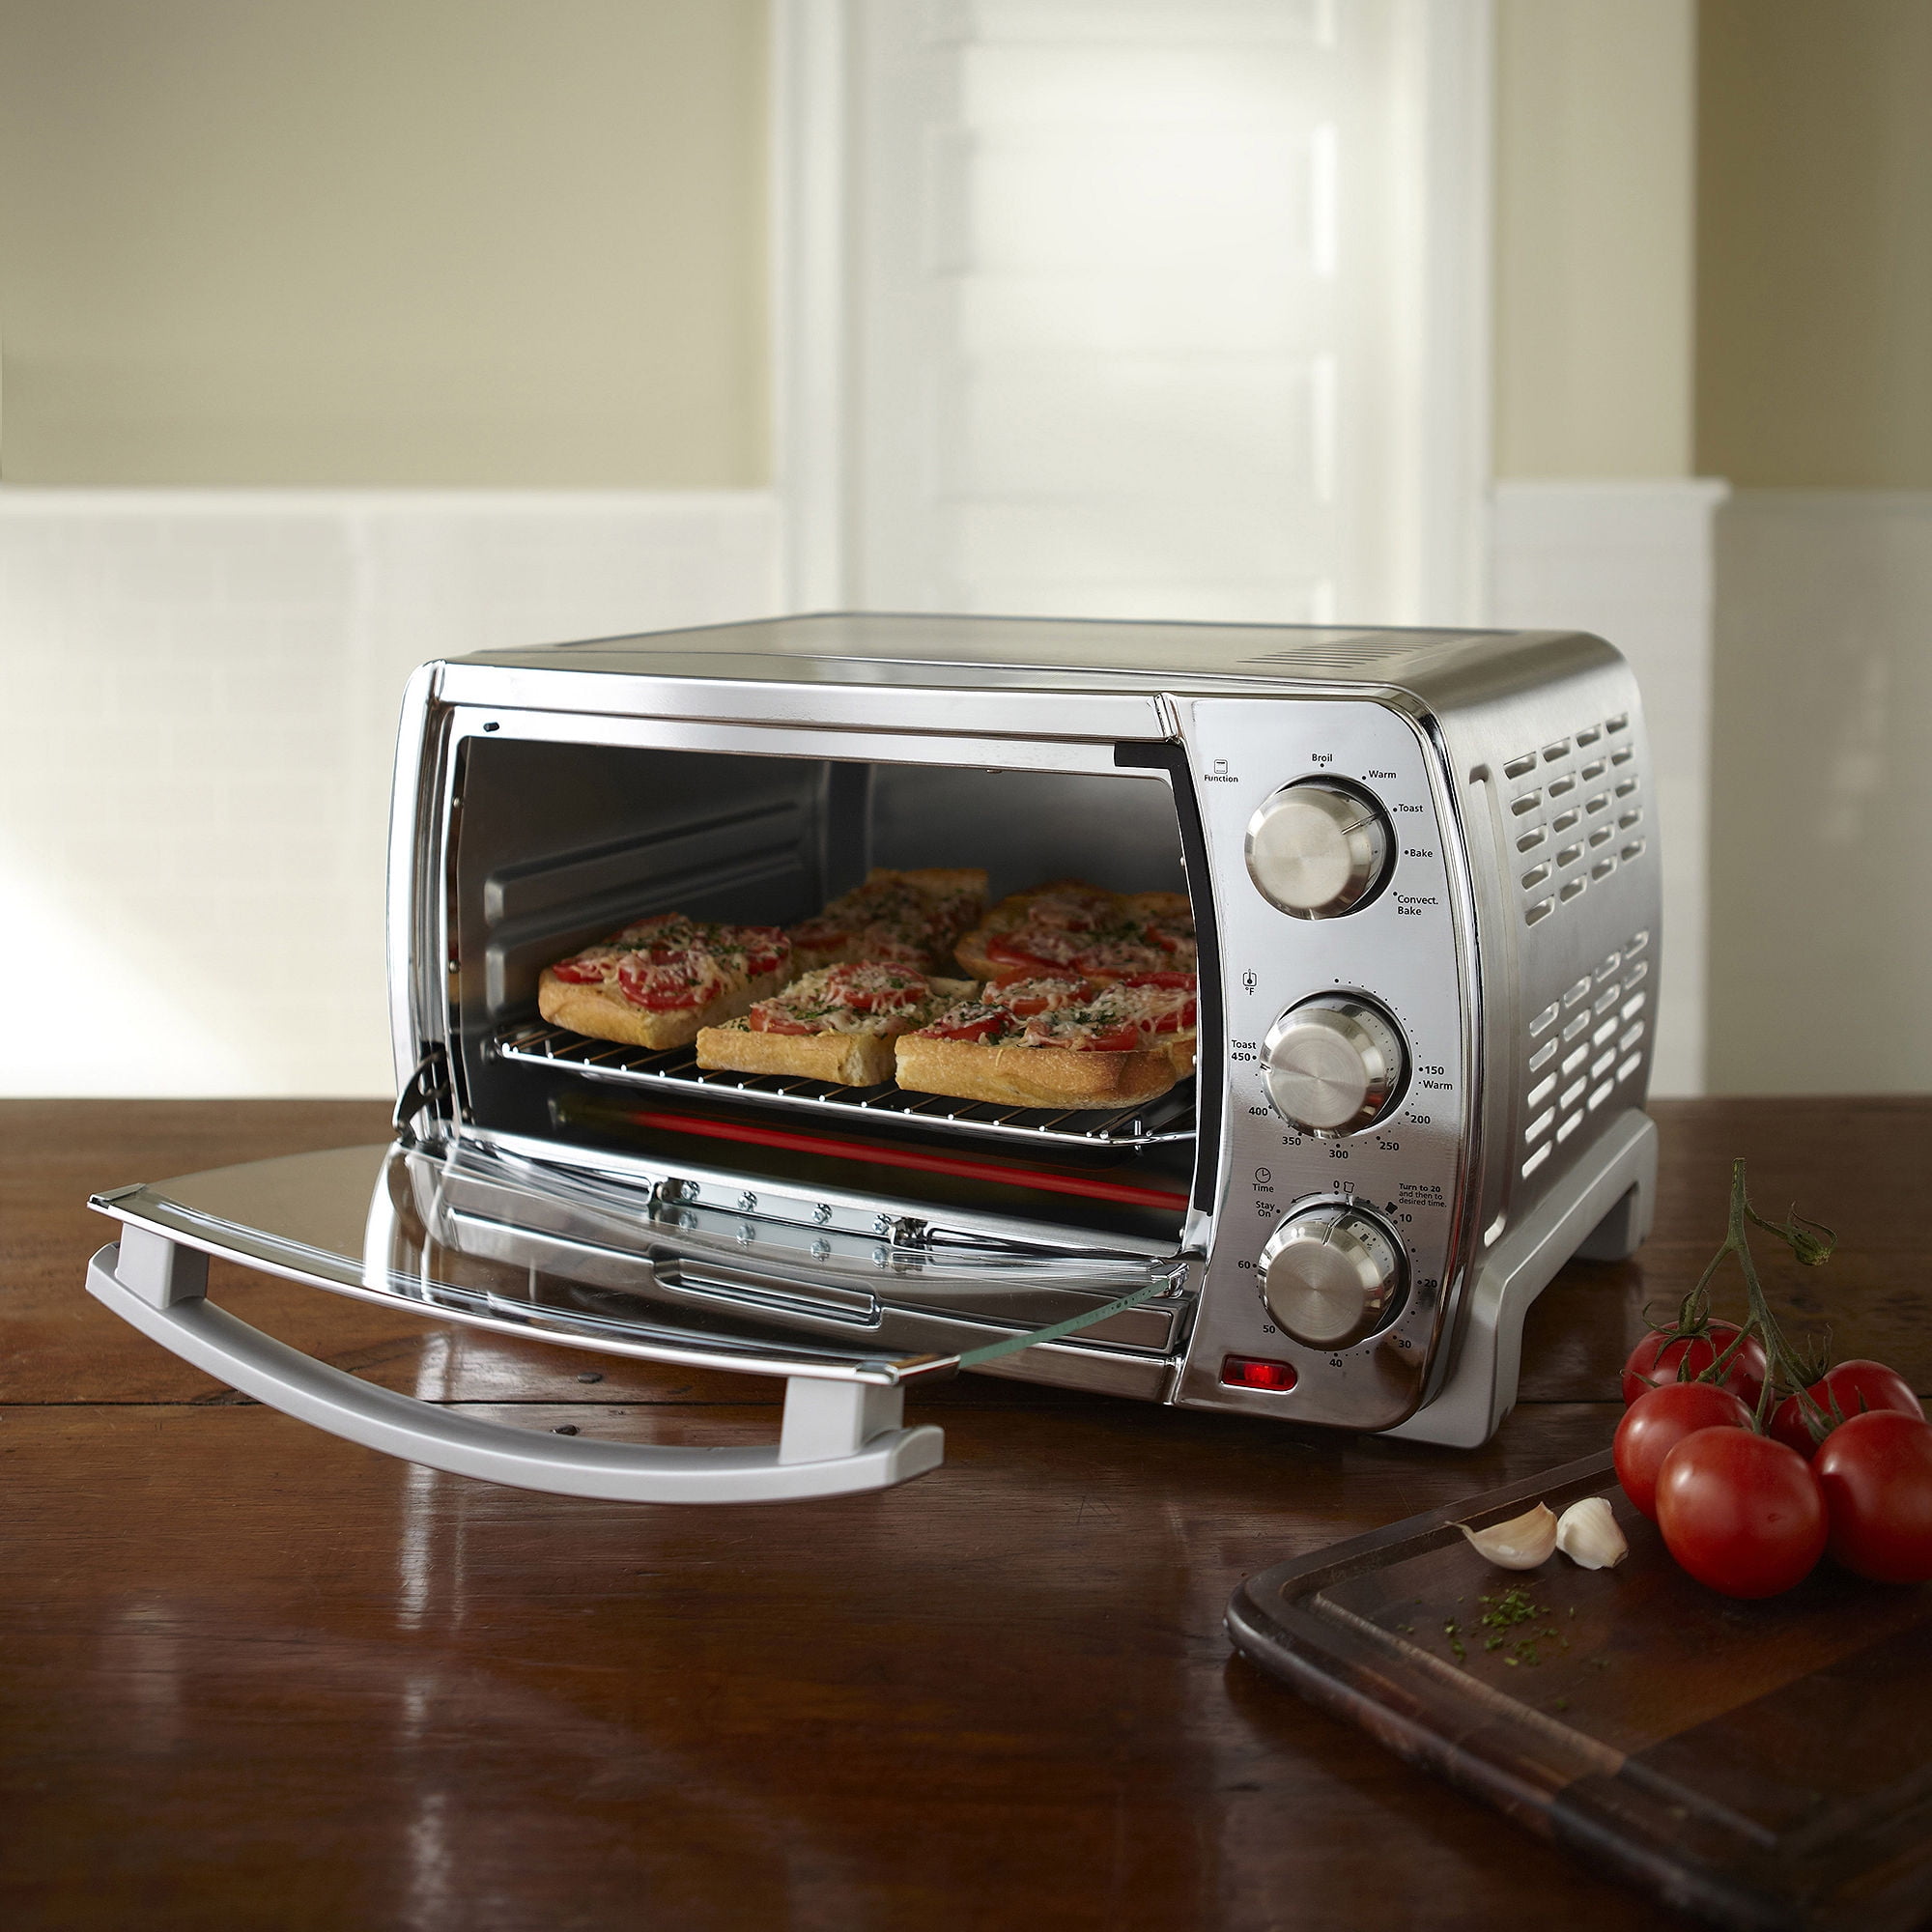 Oster Extra Large Countertop Oven #TSSTTVXLDG-001 Review  Countertop oven, Countertop  convection oven, Convection toaster oven